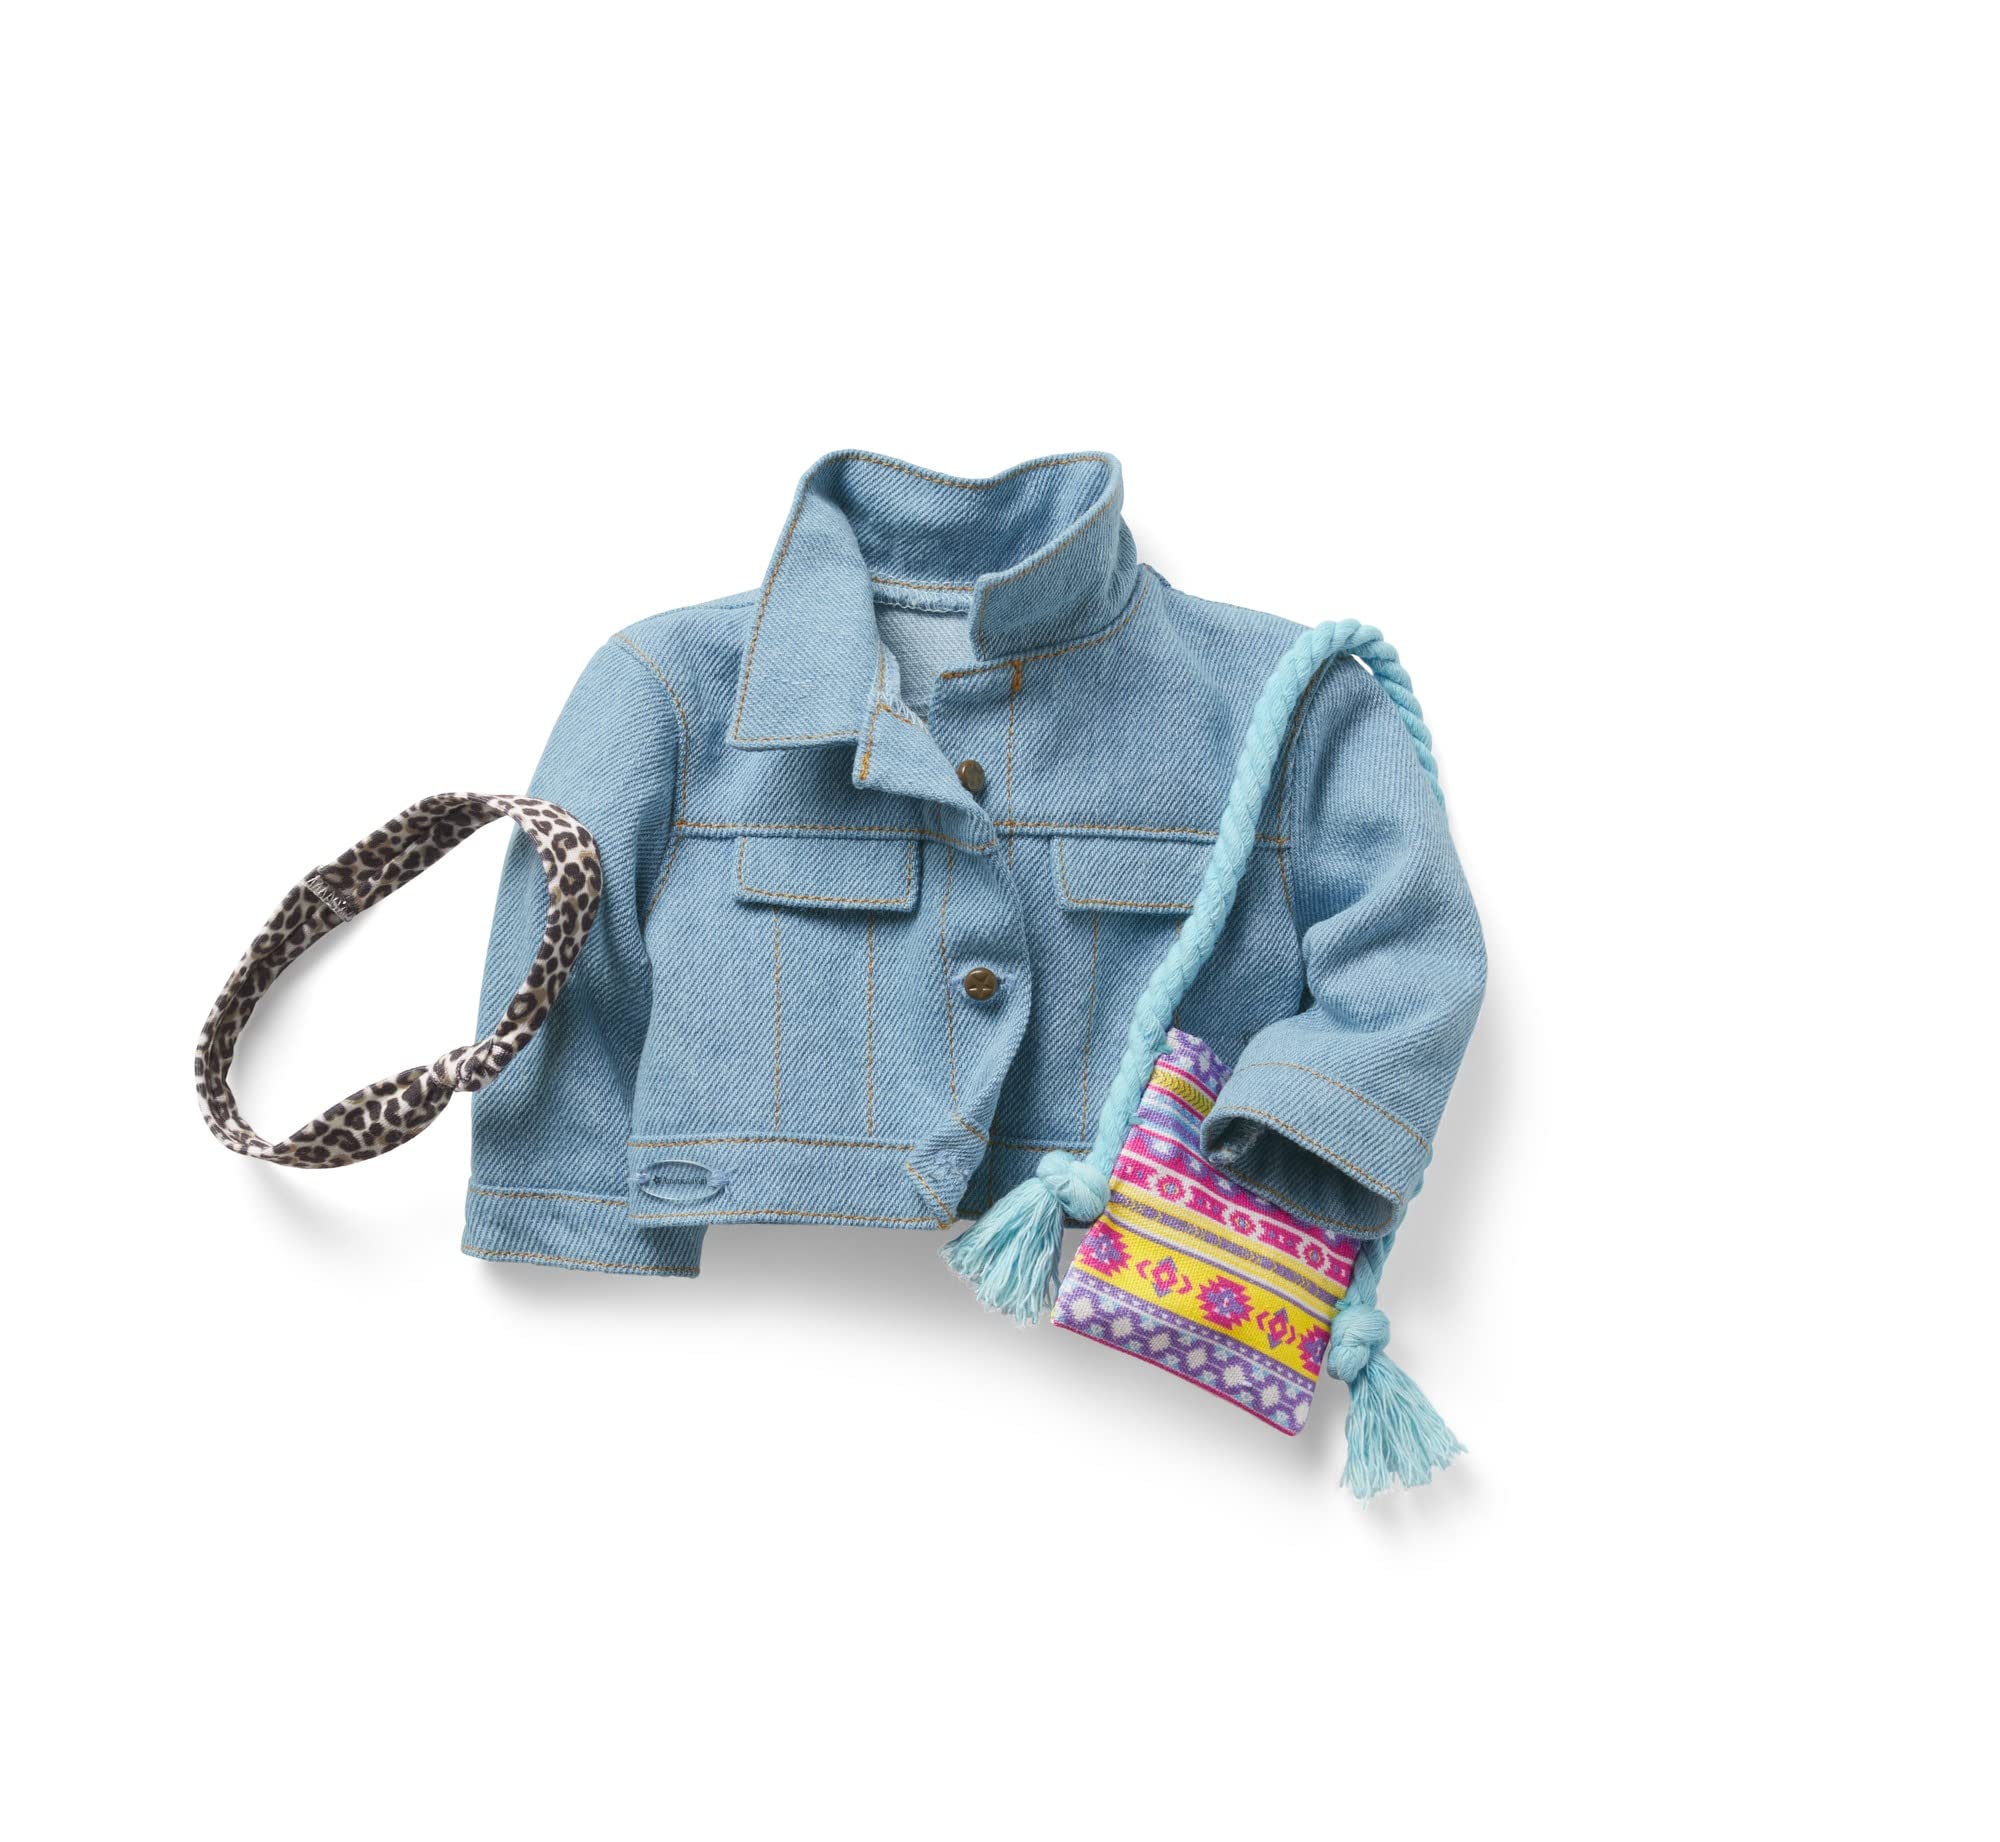 American Girl Truly Me Show Your Artsy Side Accessories for 18-inch Dolls with Jean Jacket, Purse and Headband